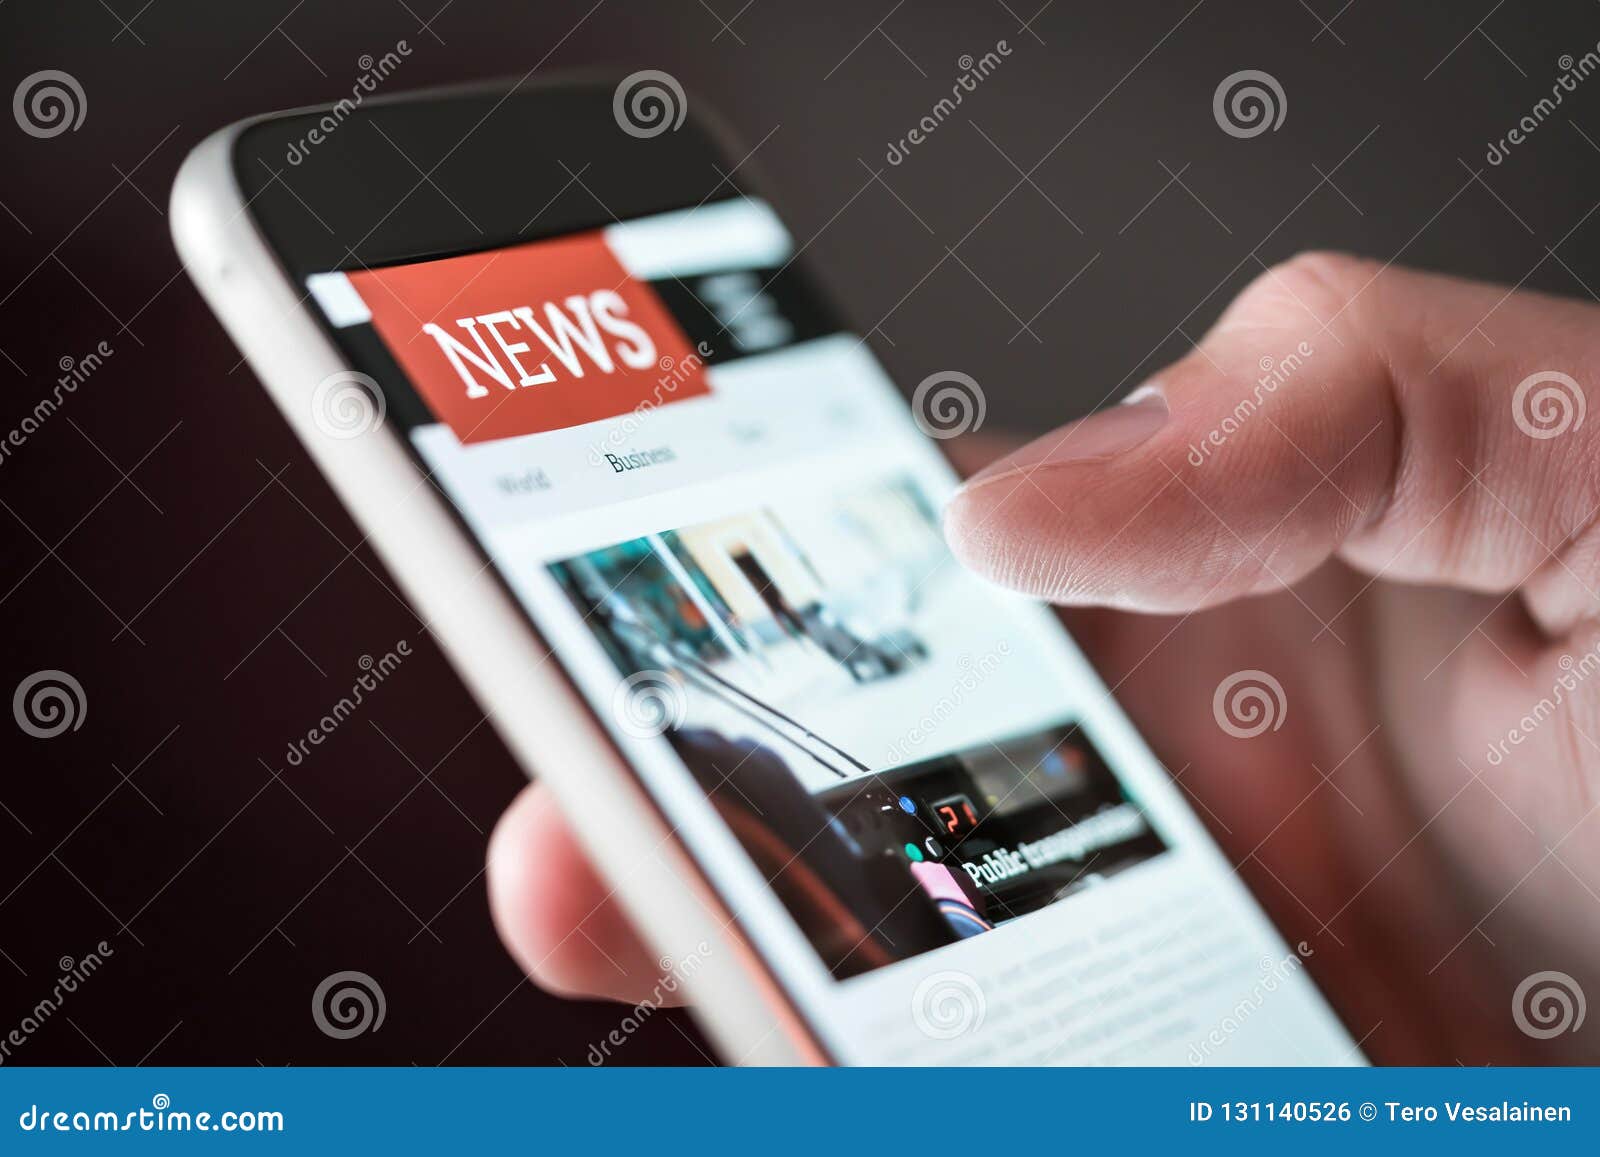 mobile news application in smartphone. man reading online news on website with cellphone.